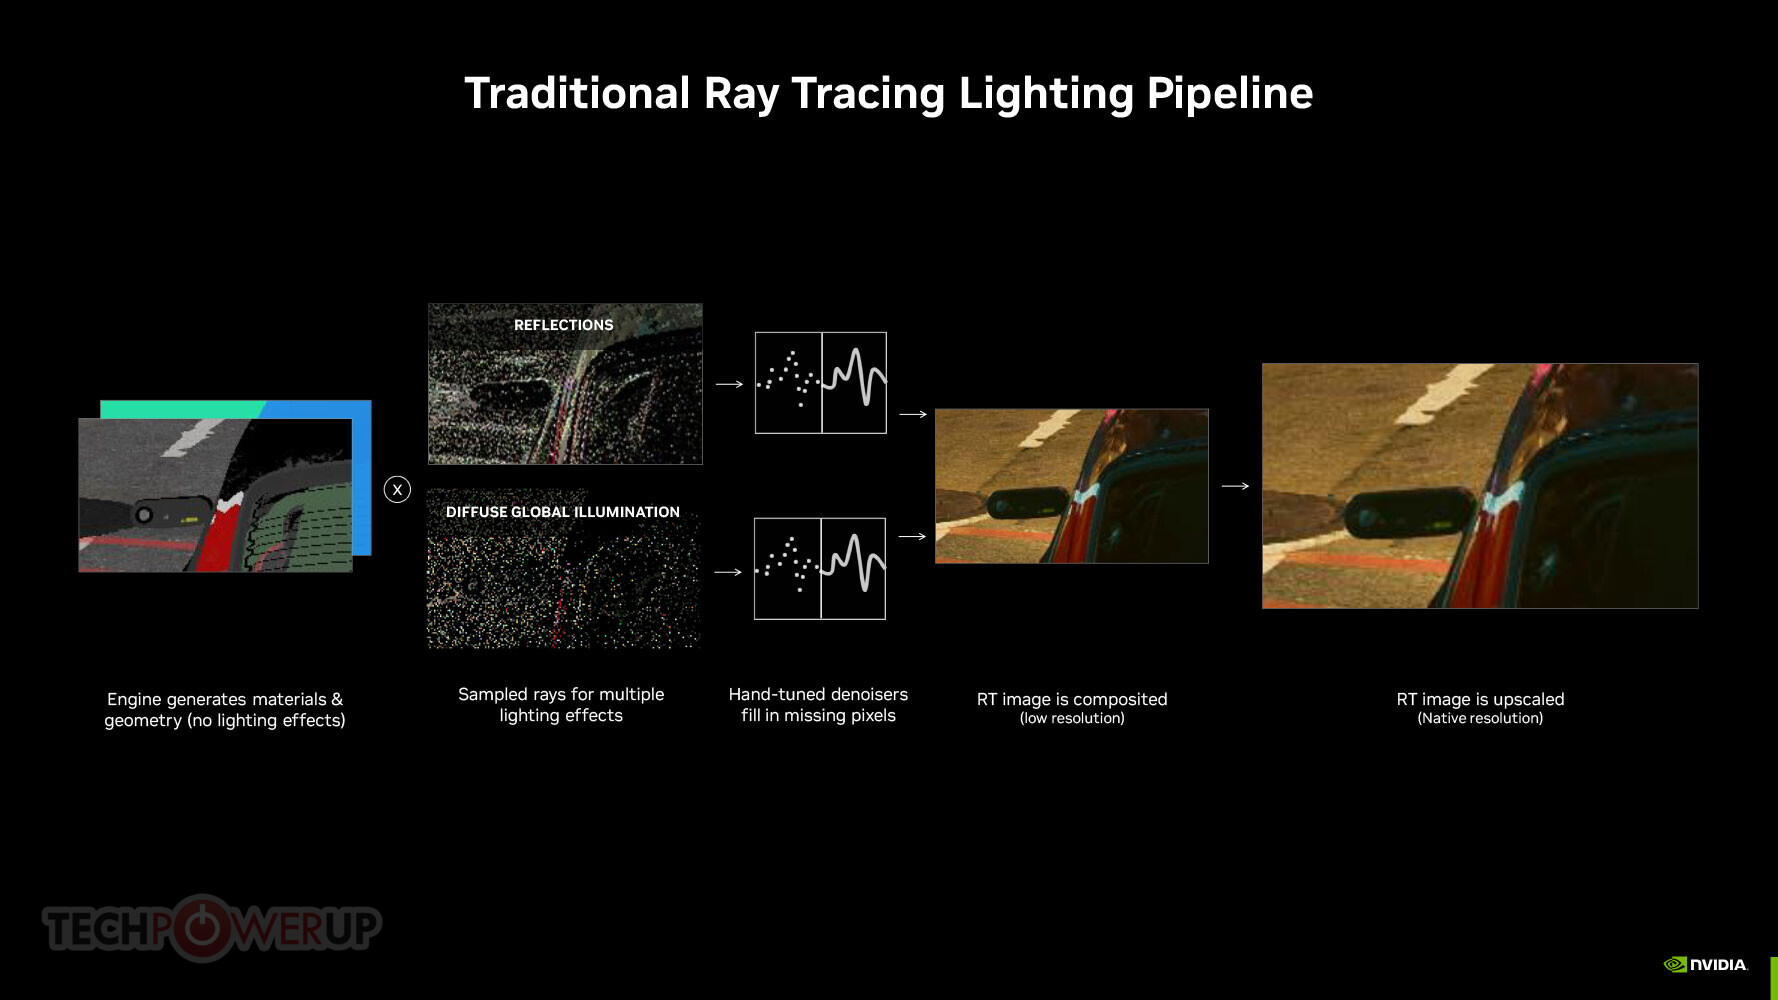 Nvidia's Ray Reconstruction aims to do for ray tracing what DLSS did for  anti-aliasing